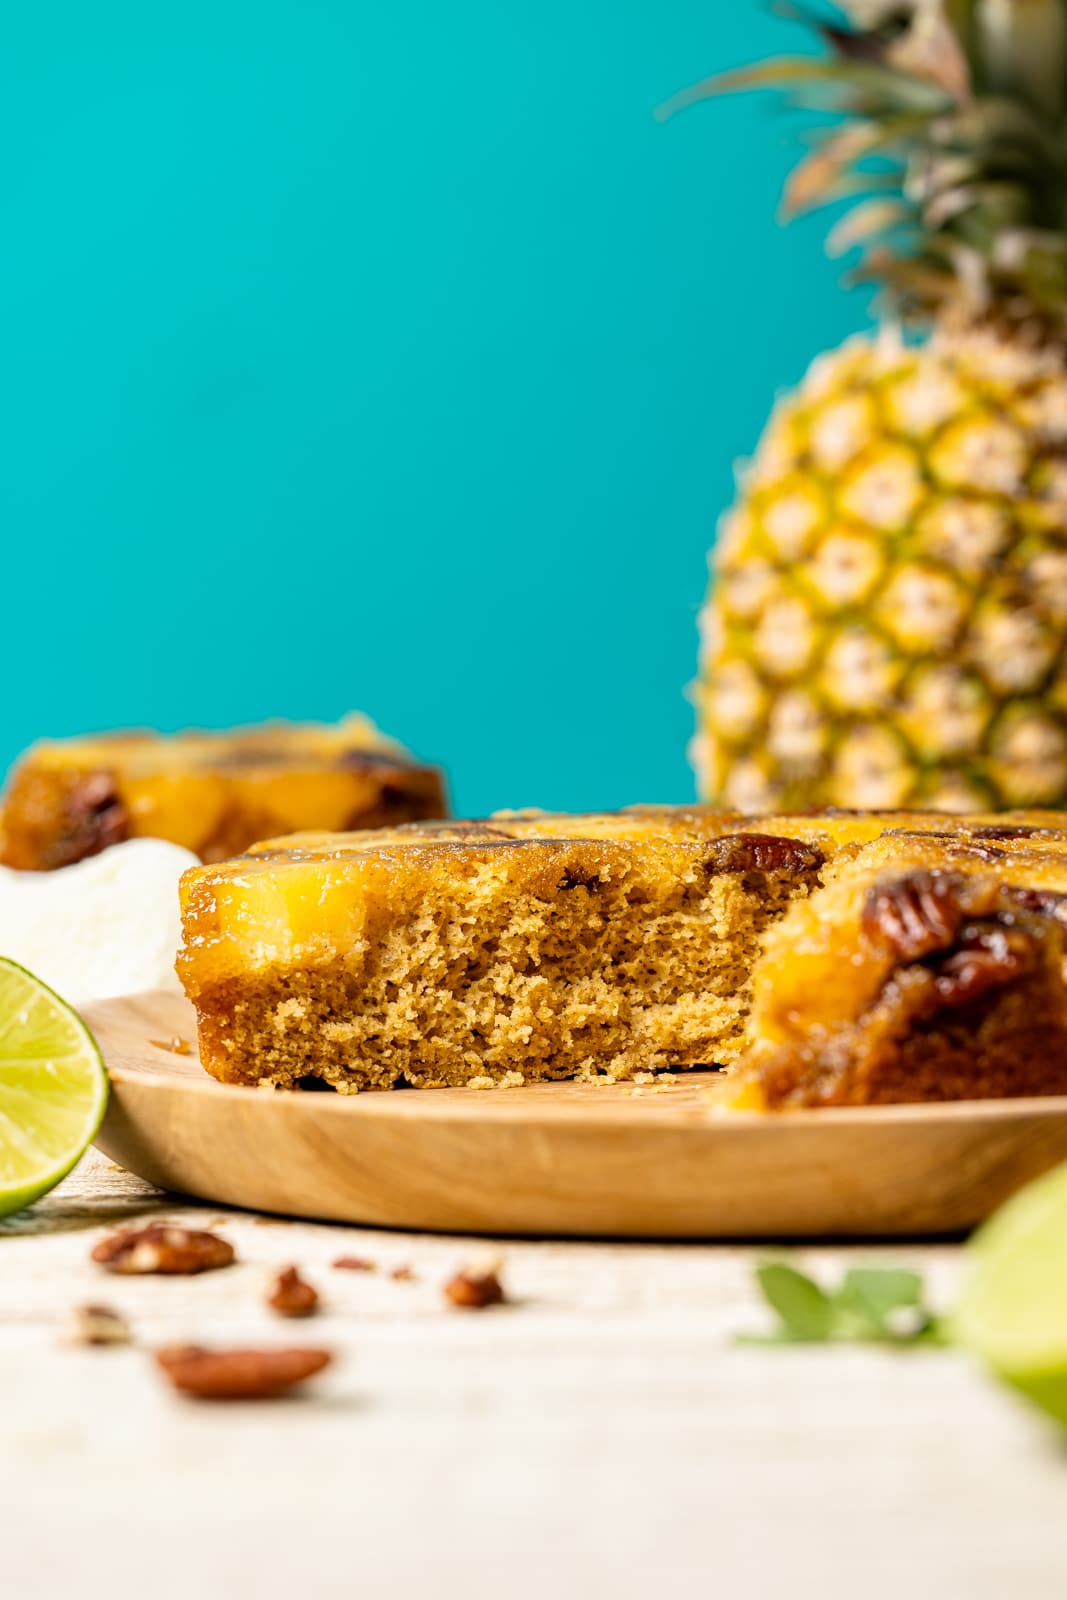 Forward view of cake with pineapple, lime, and pecans on a white table with a blue background.